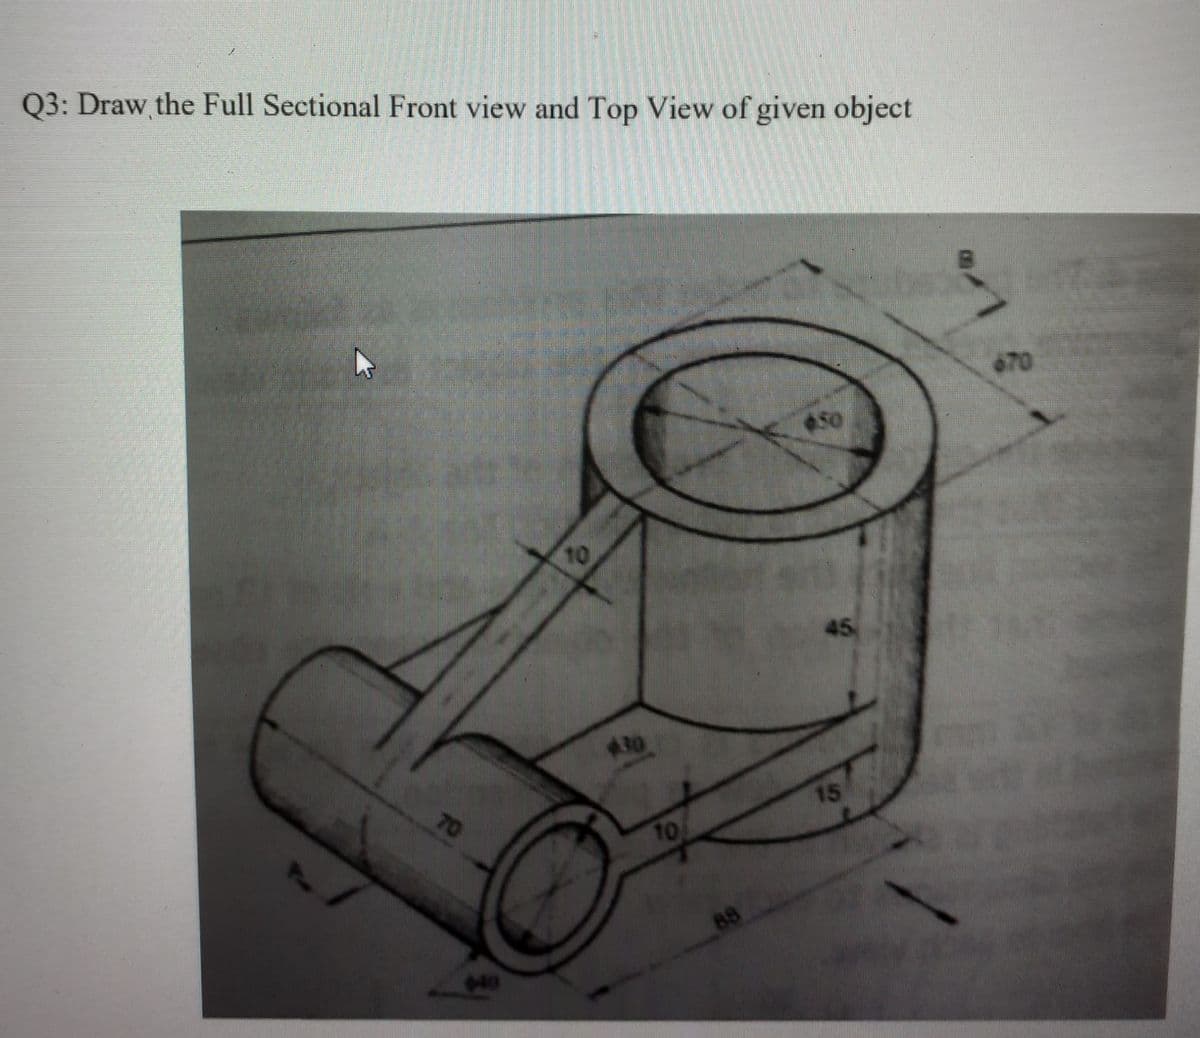 Q3: Draw the Full Sectional Front view and Top View of given object
70
So
t0
45
30
70
15
10
88
